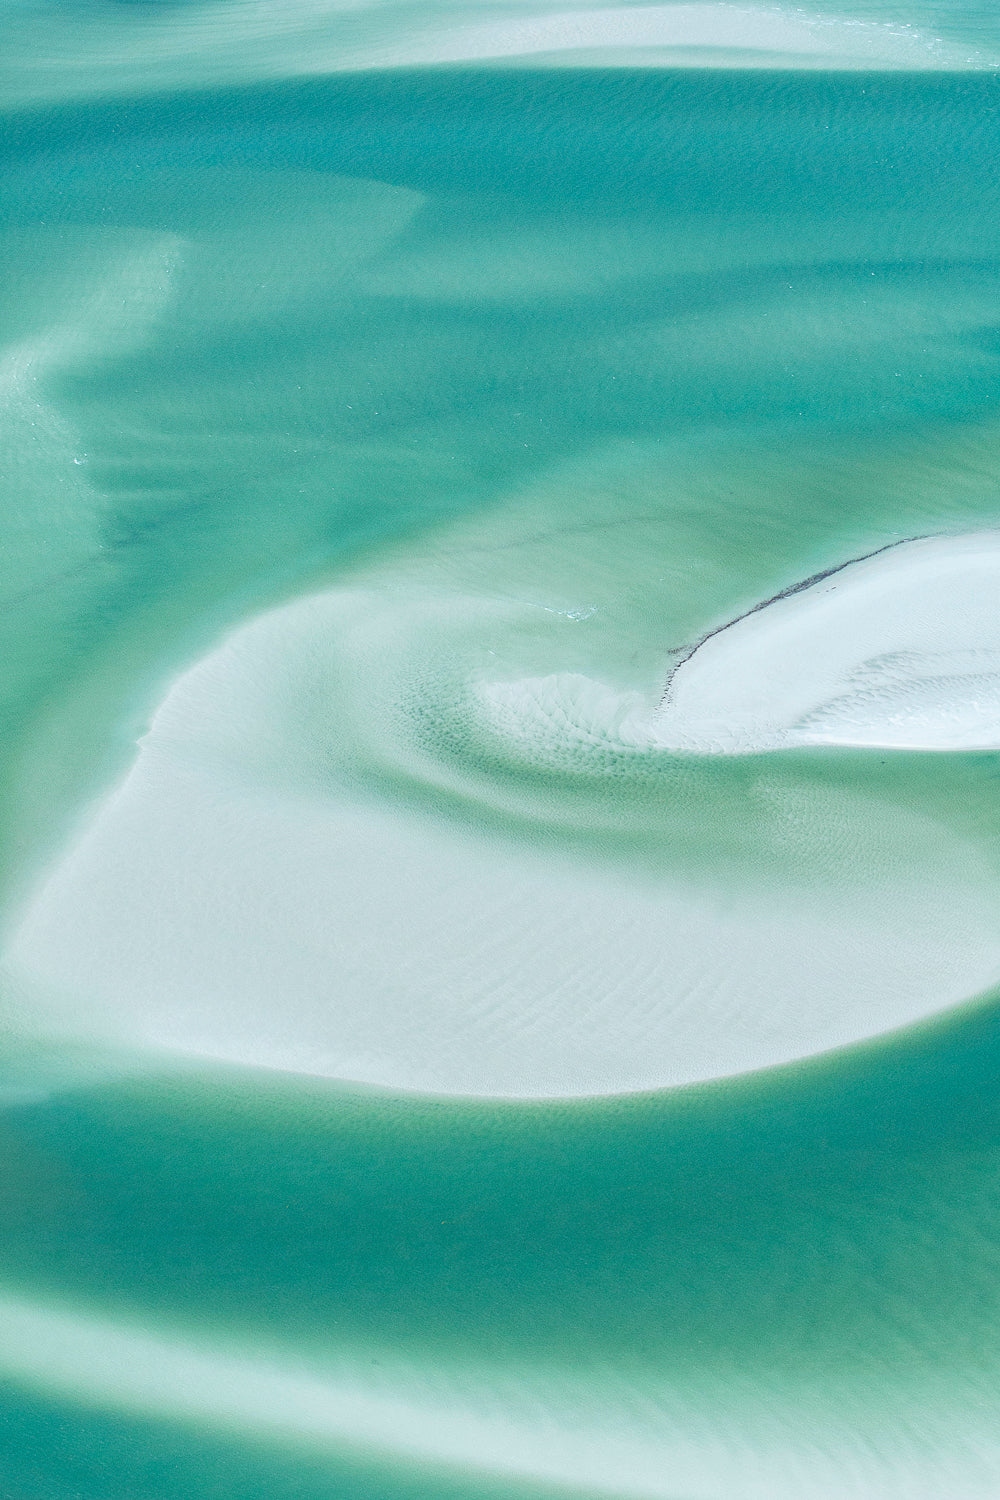 turquiose water swirling amongst white silica sand